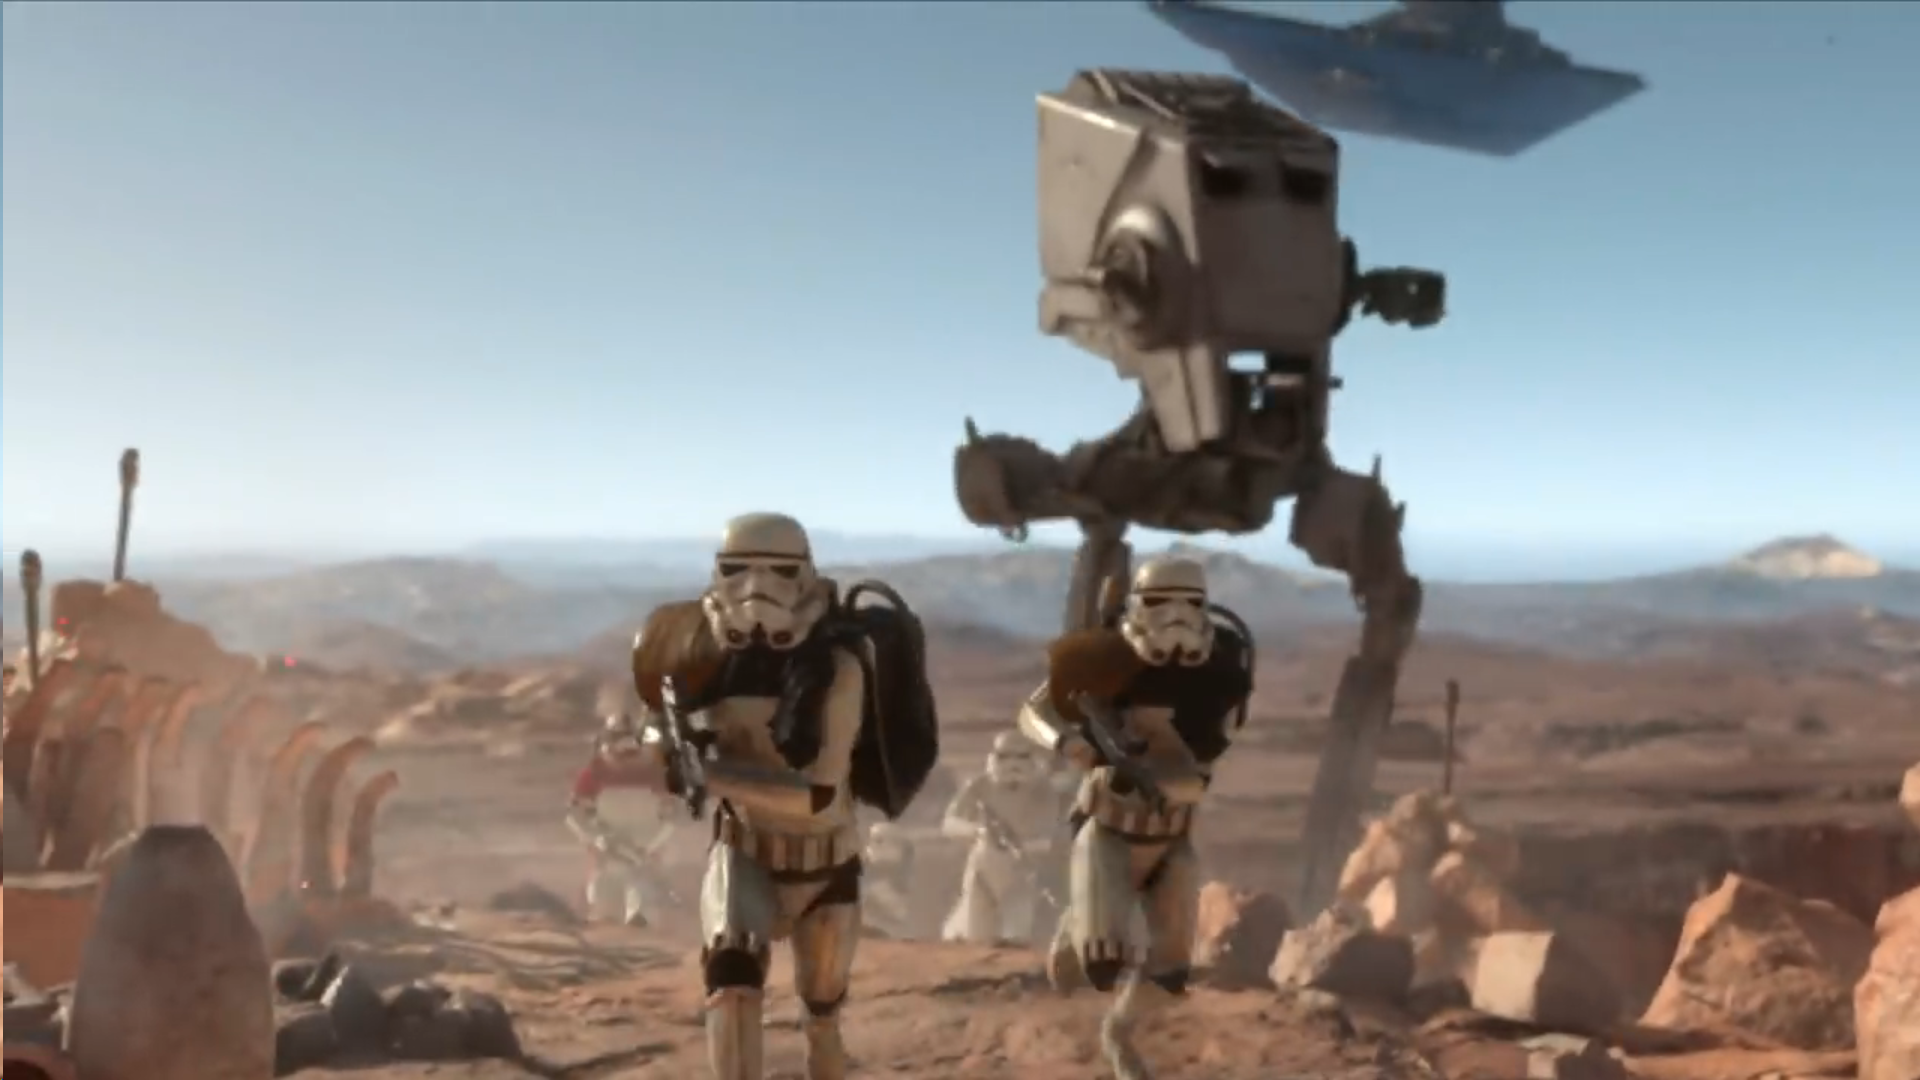 E3 2015: Star Wars Battlefront has a Survival Mode, Which Is Really Just Horde Mode